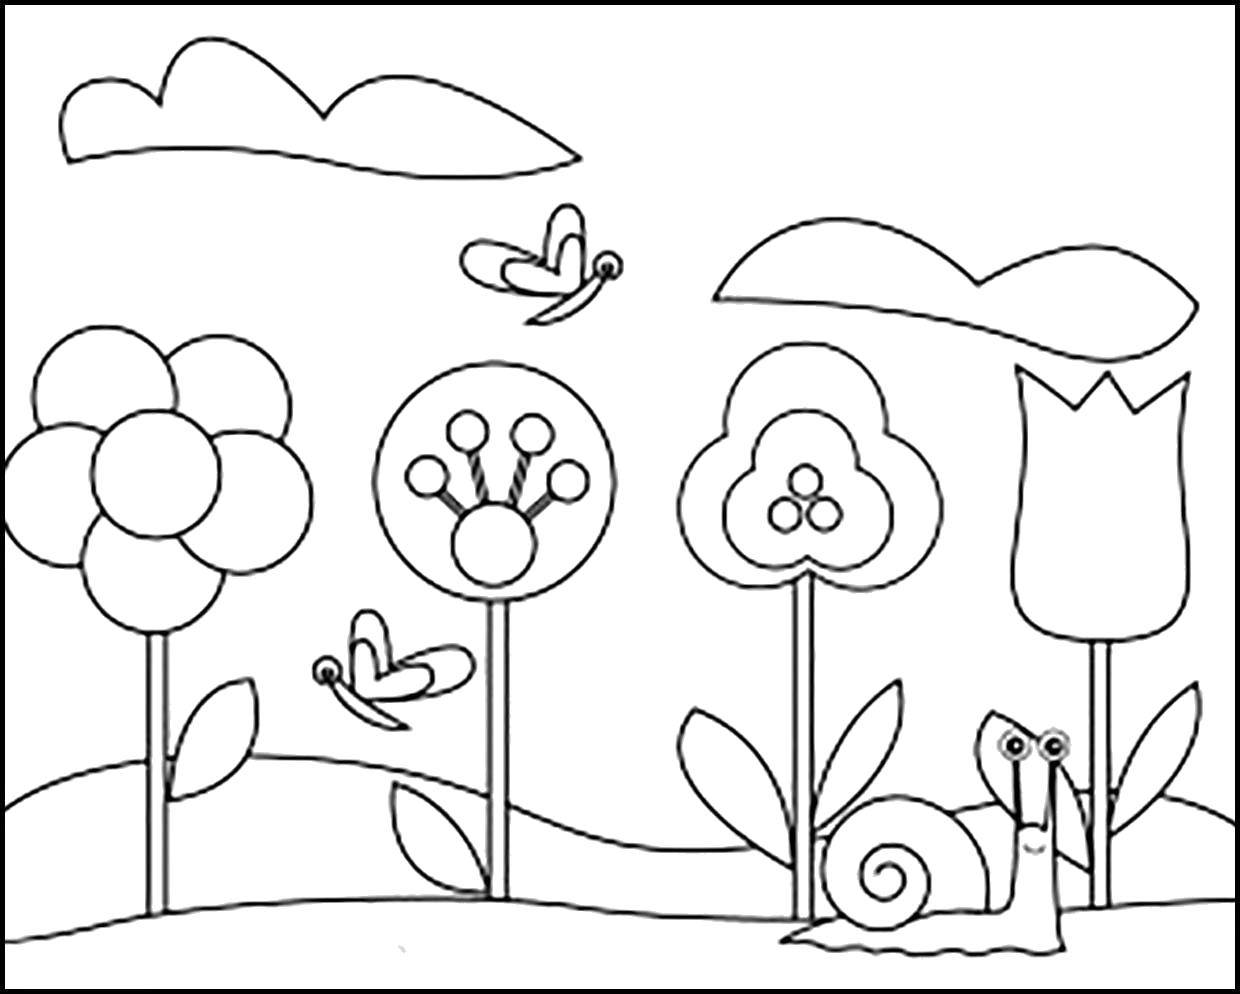 Coloring Flowers. Category Coloring pages for kids. Tags:  Flowers.